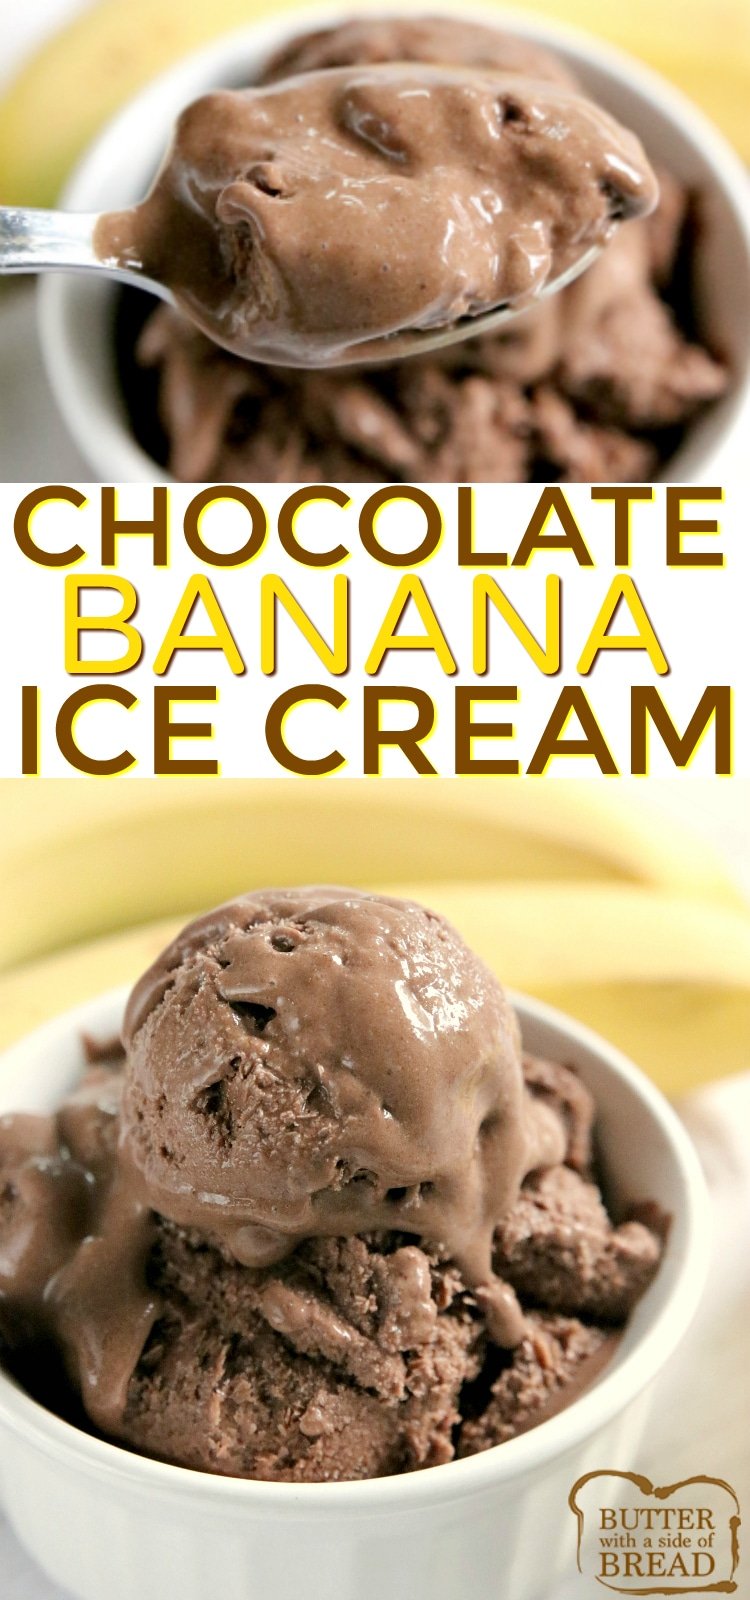 Chocolate Banana Ice Cream is made with only 4 ingredients and a blender - no ice cream maker required! This banana ice cream recipe is deliciously creamy, full of chocolate and so easy to make too! 